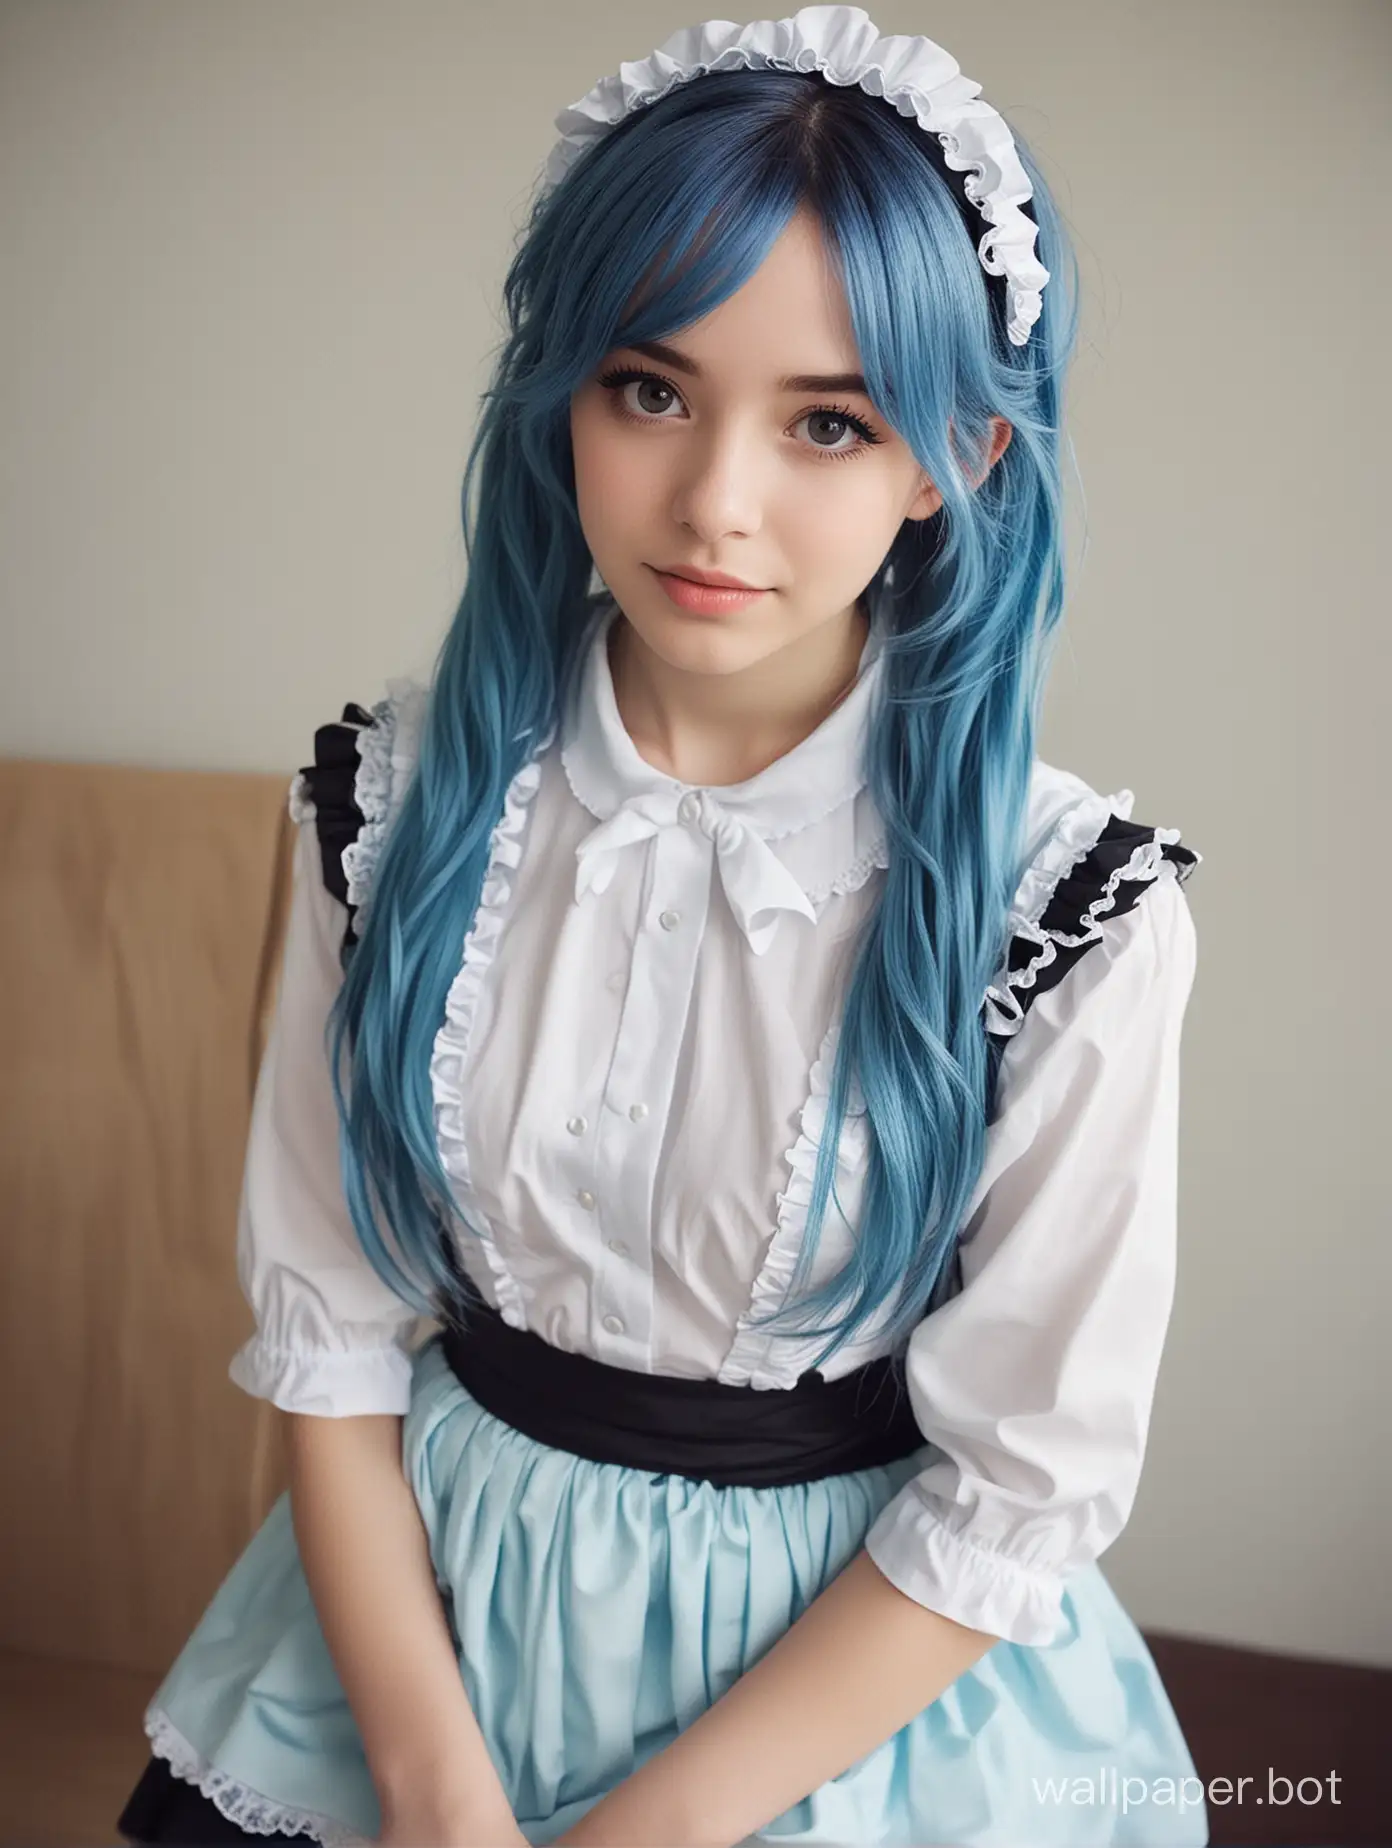 Petite-Girl-with-Blue-Hair-in-Cute-Maid-Dress